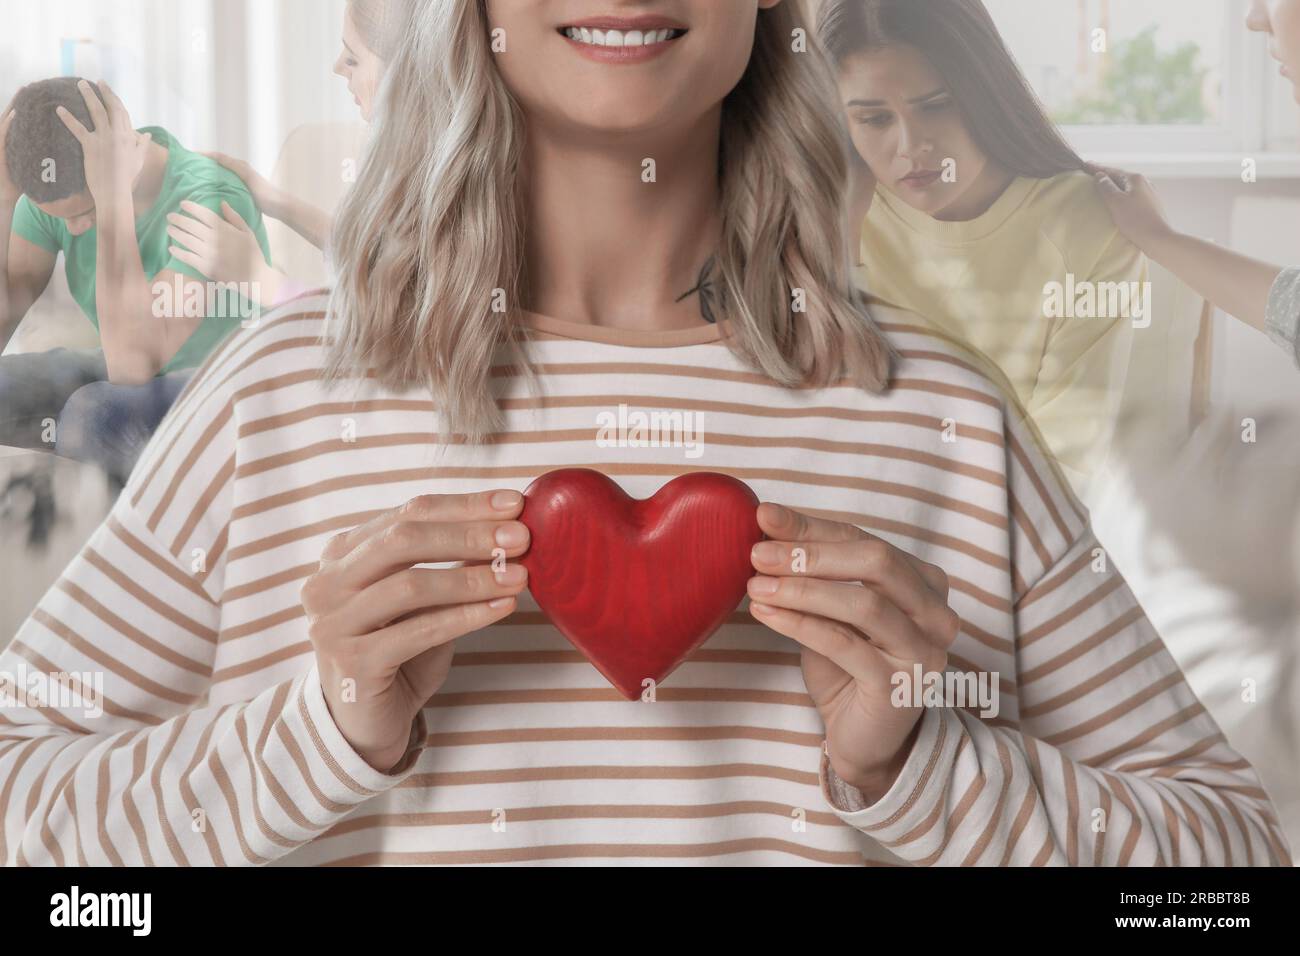 Smiling woman holding red wooden heart as symbol of empathy, closeup. Situations showing need for emotional support on background, double exposure Stock Photo